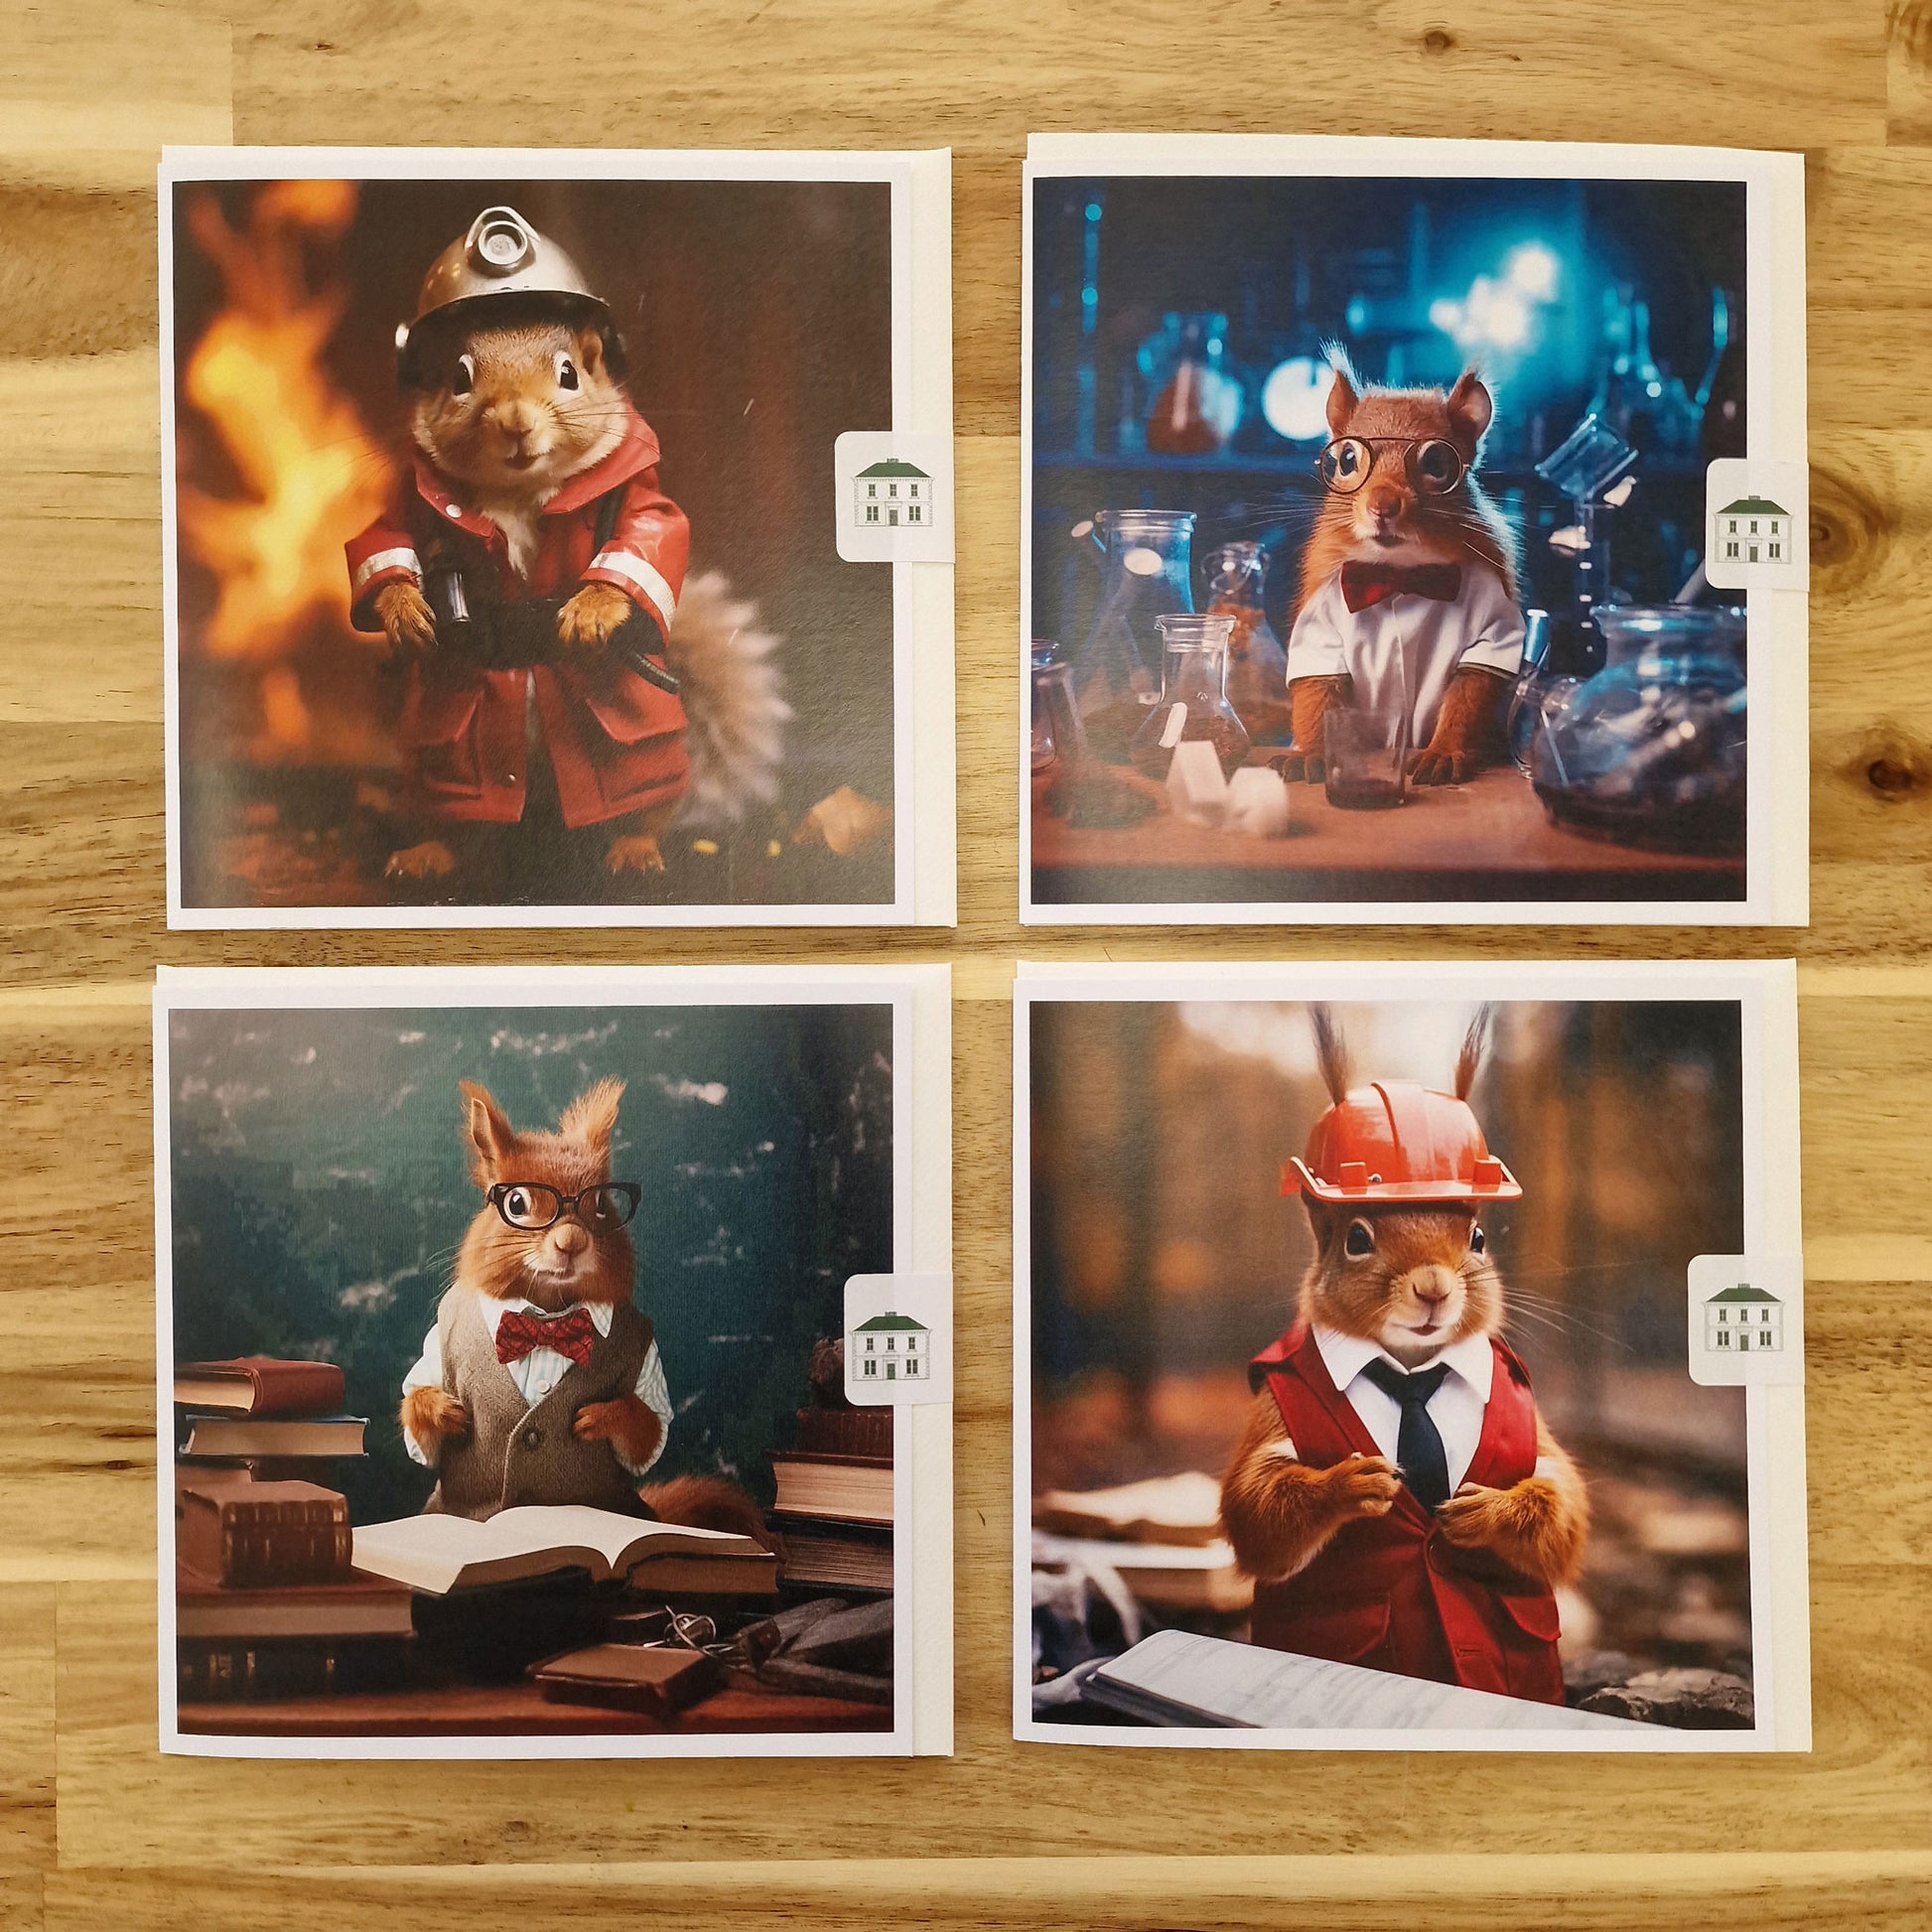 A set of four cards showing red squirrels doing professional jobs, including teacher, firefighters, scientist and architect